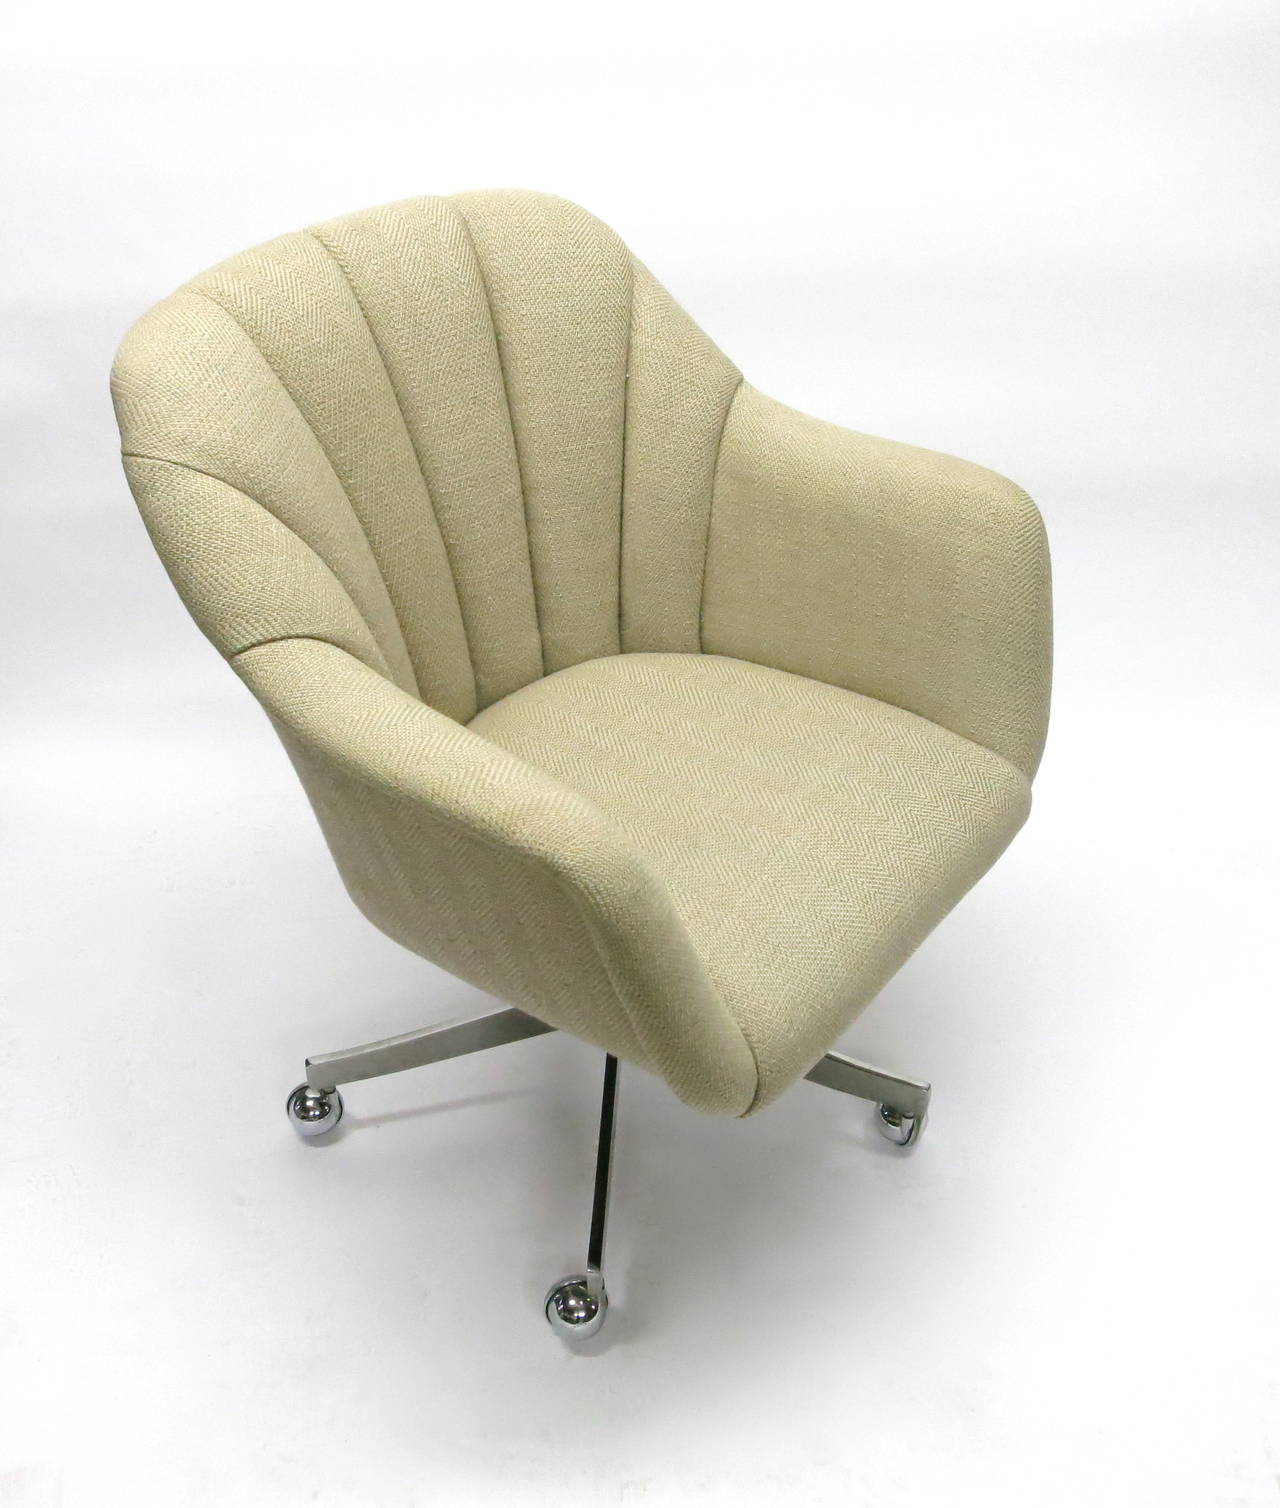 Single Swivel Desk Chair by Ward Bennett for Brickell, 1984 Made in USA 3